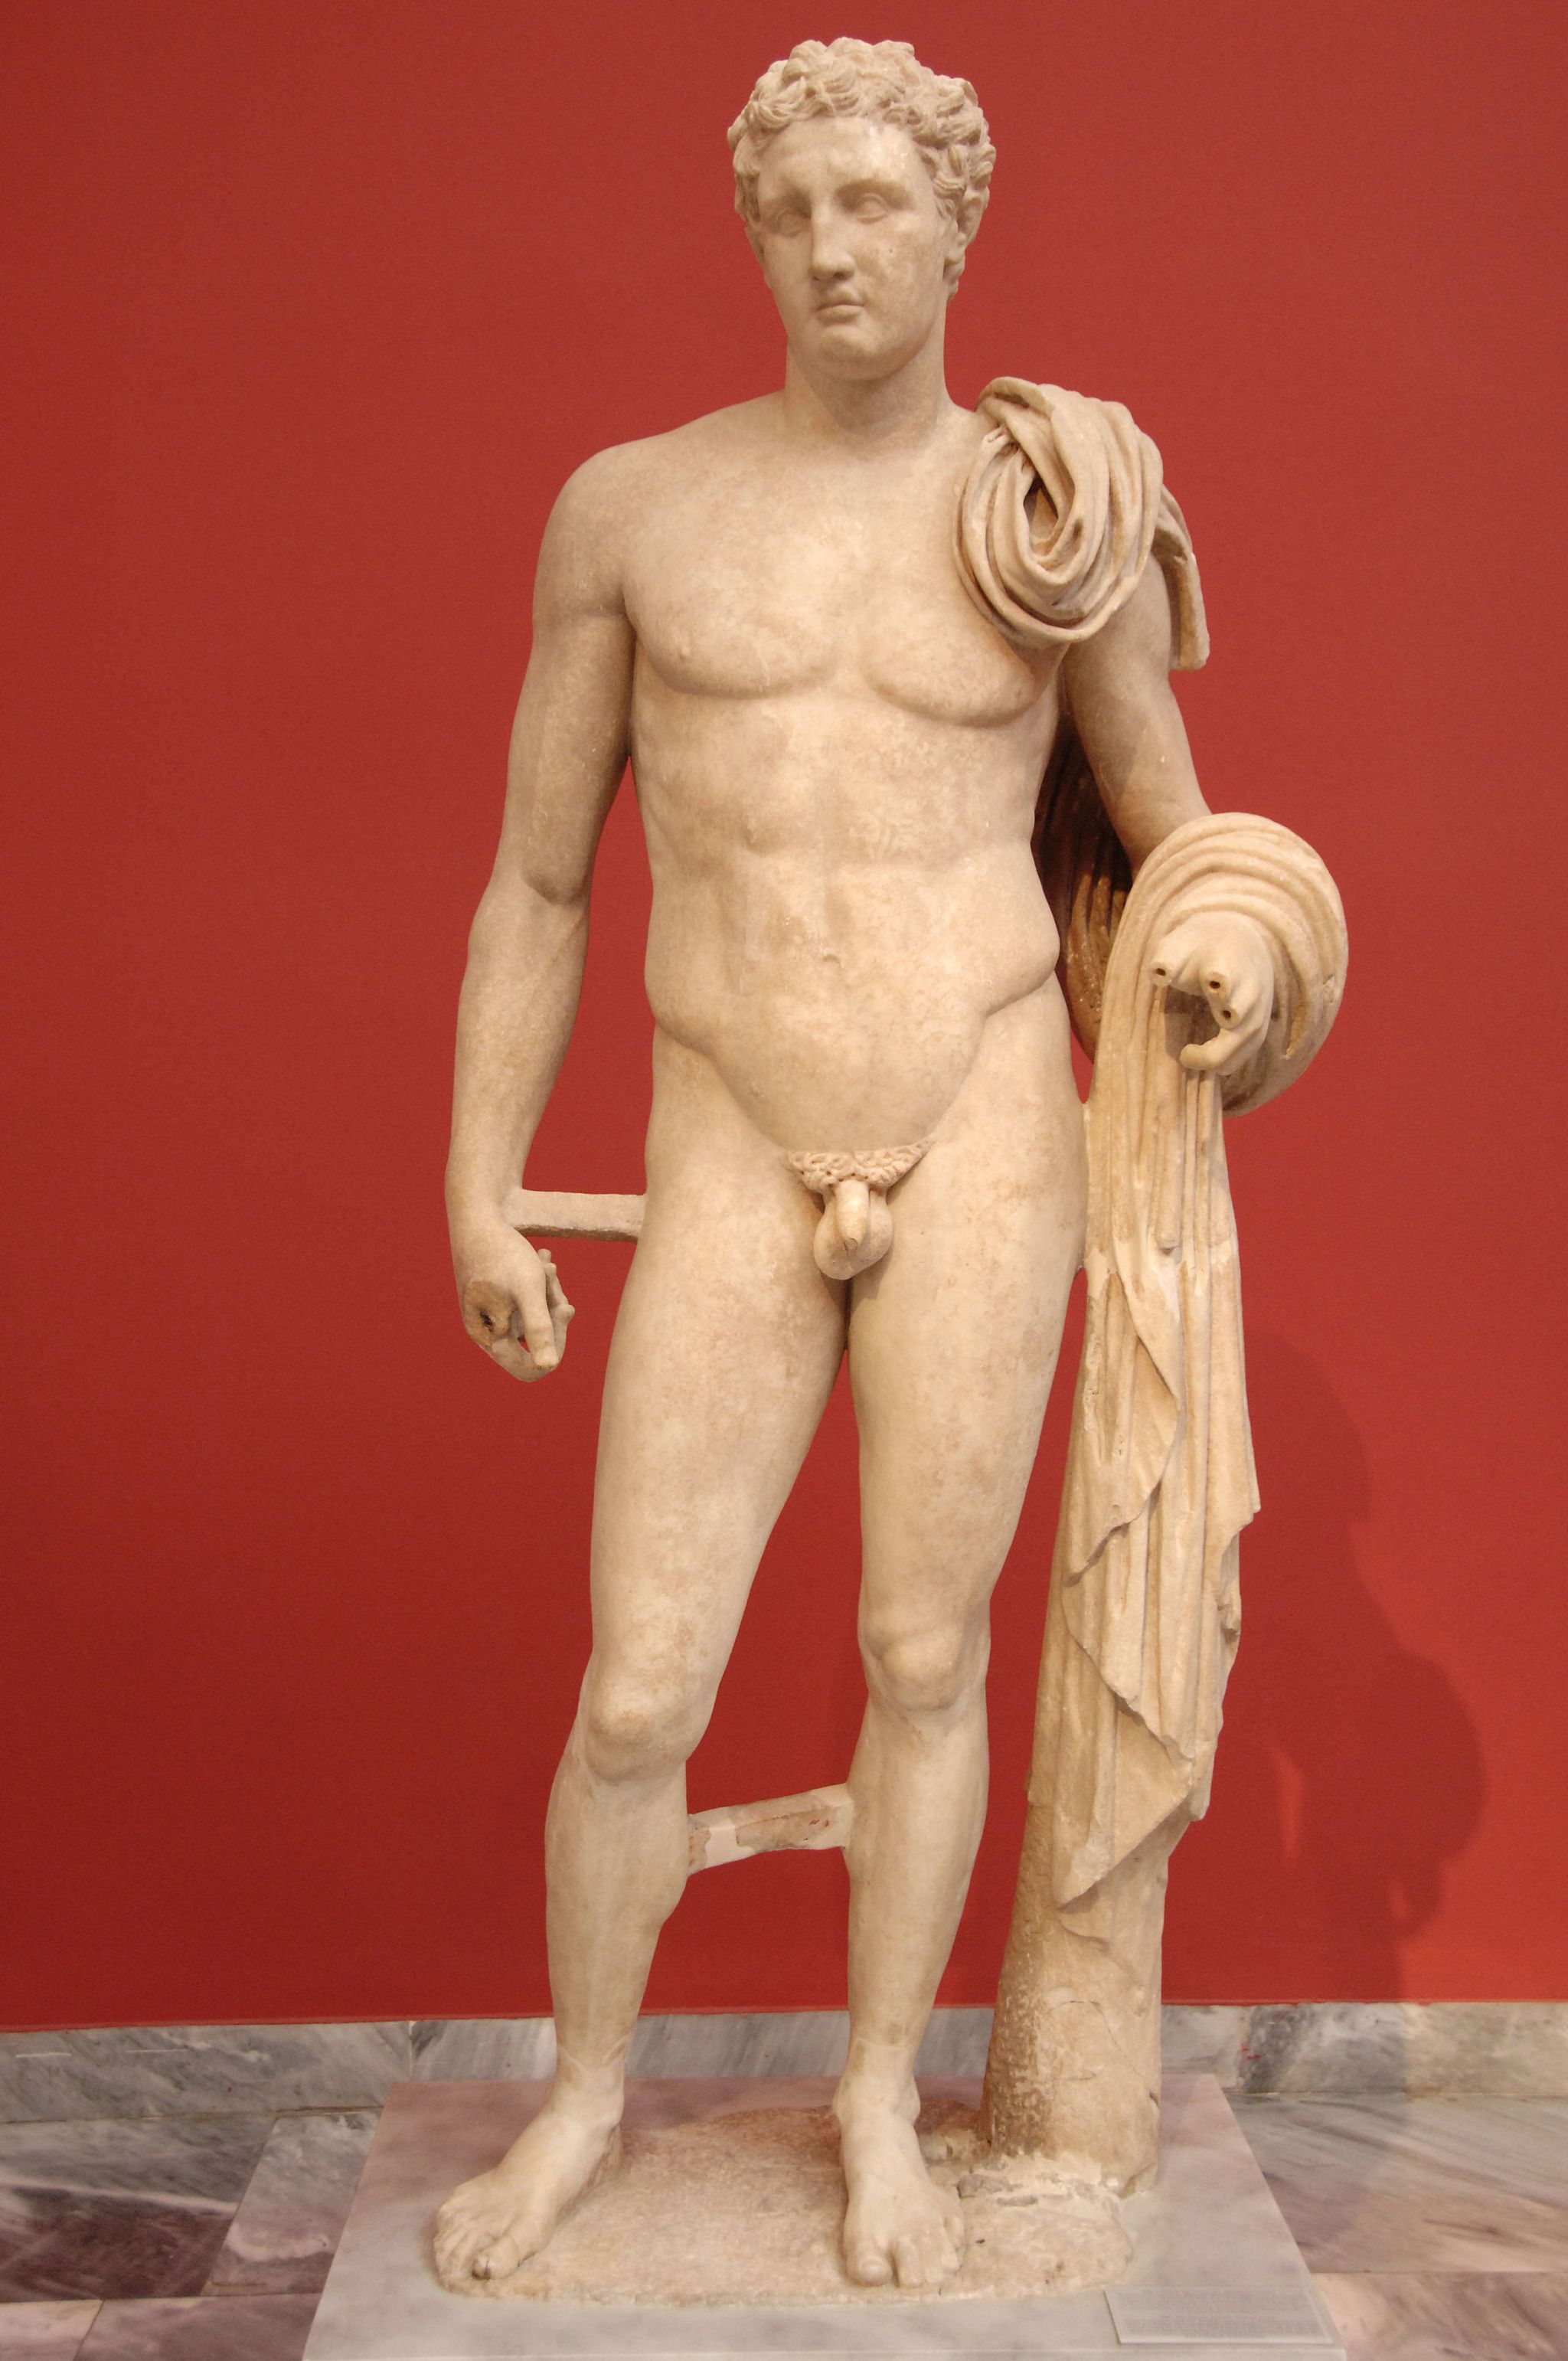 Ever wondered why all the men in ancient statues all have small penises